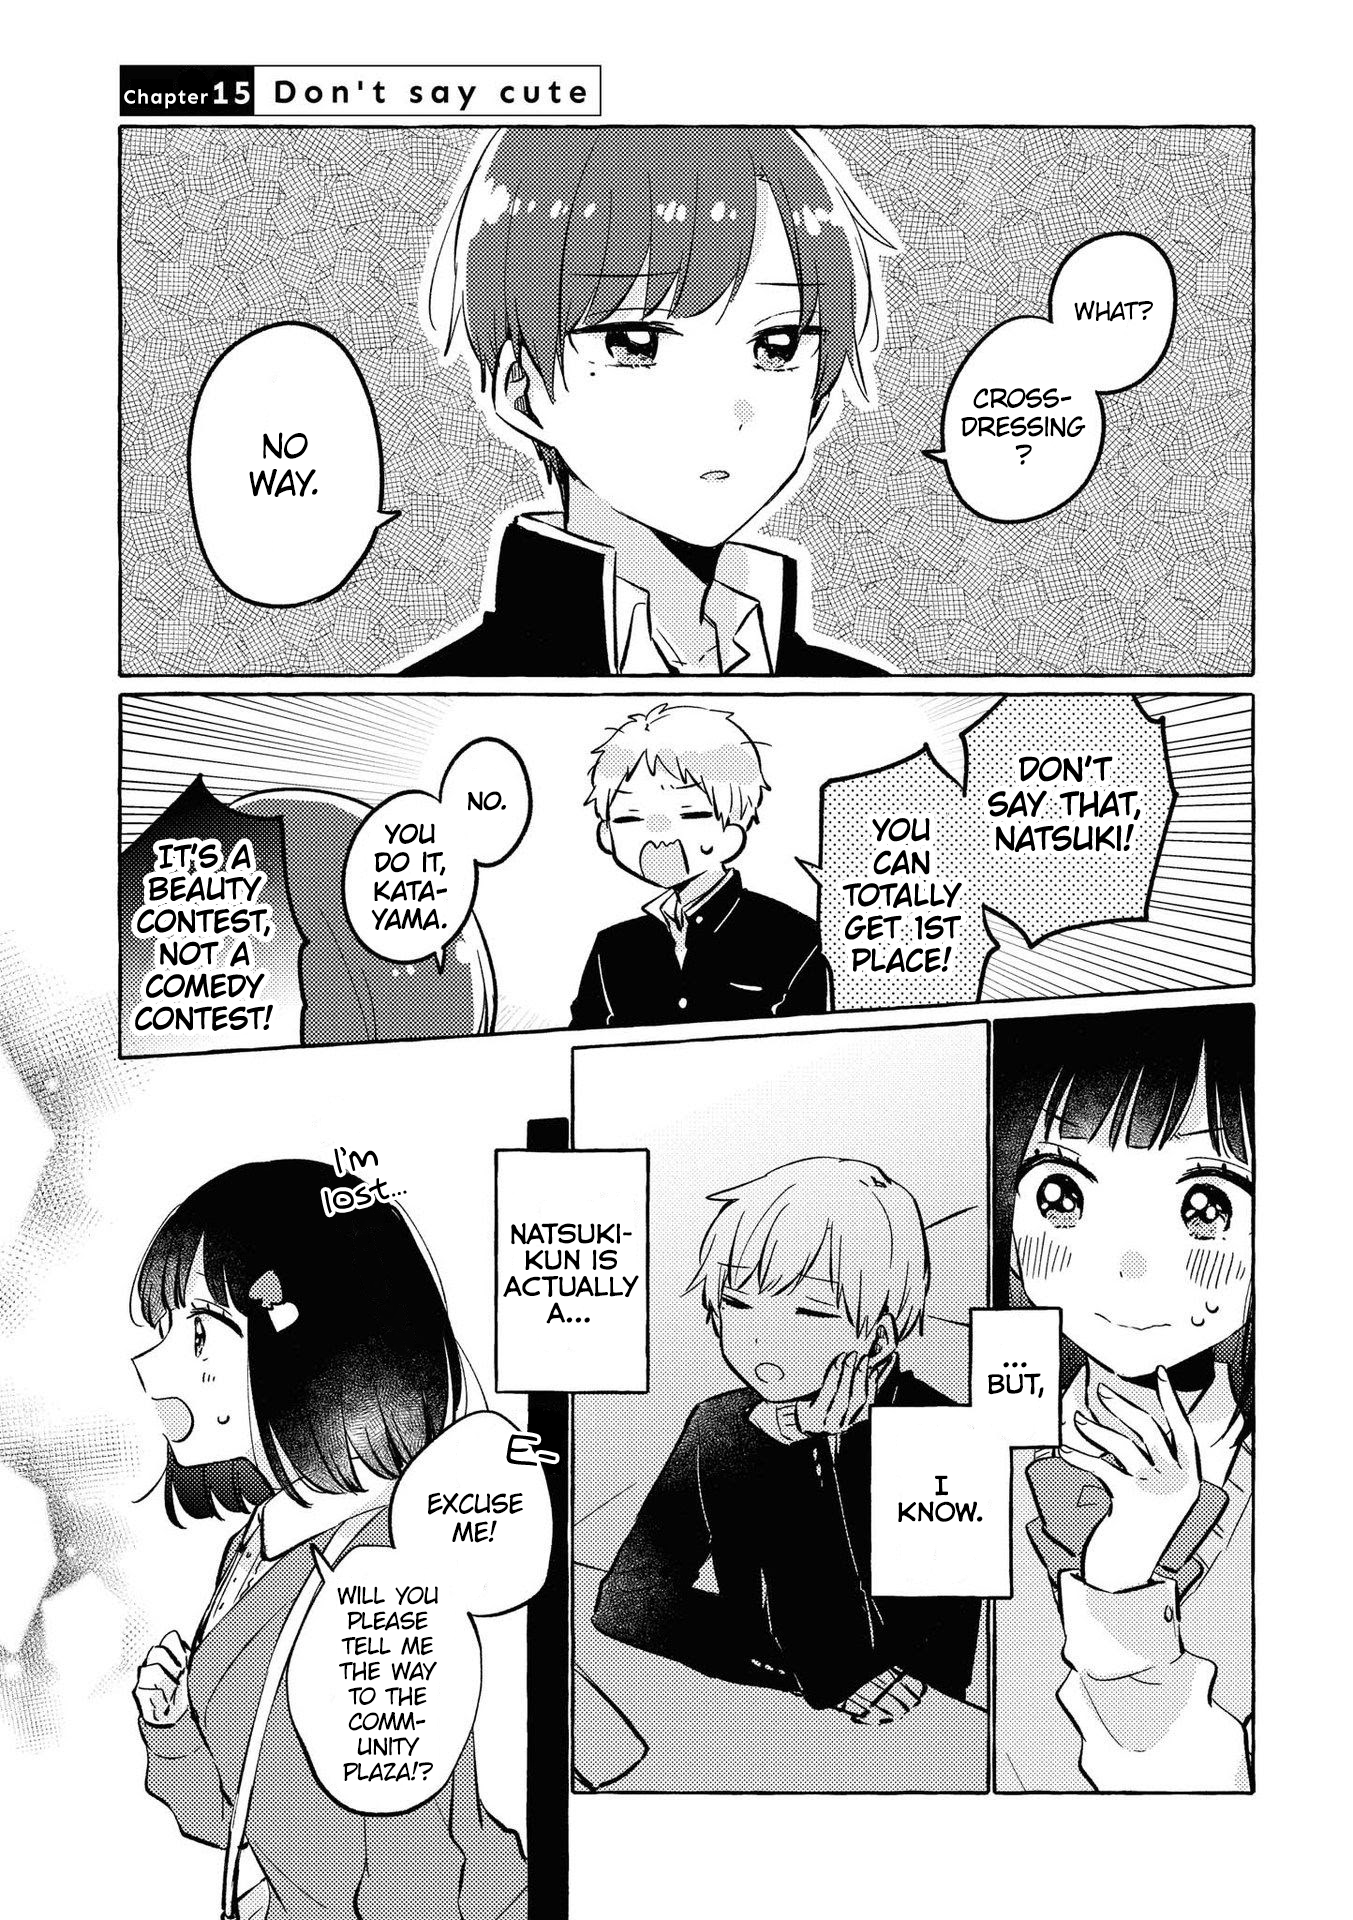 Natsuki-Kun Is Beautiful As Always Vol.1 Chapter 15: Don't Say Cute - Picture 2